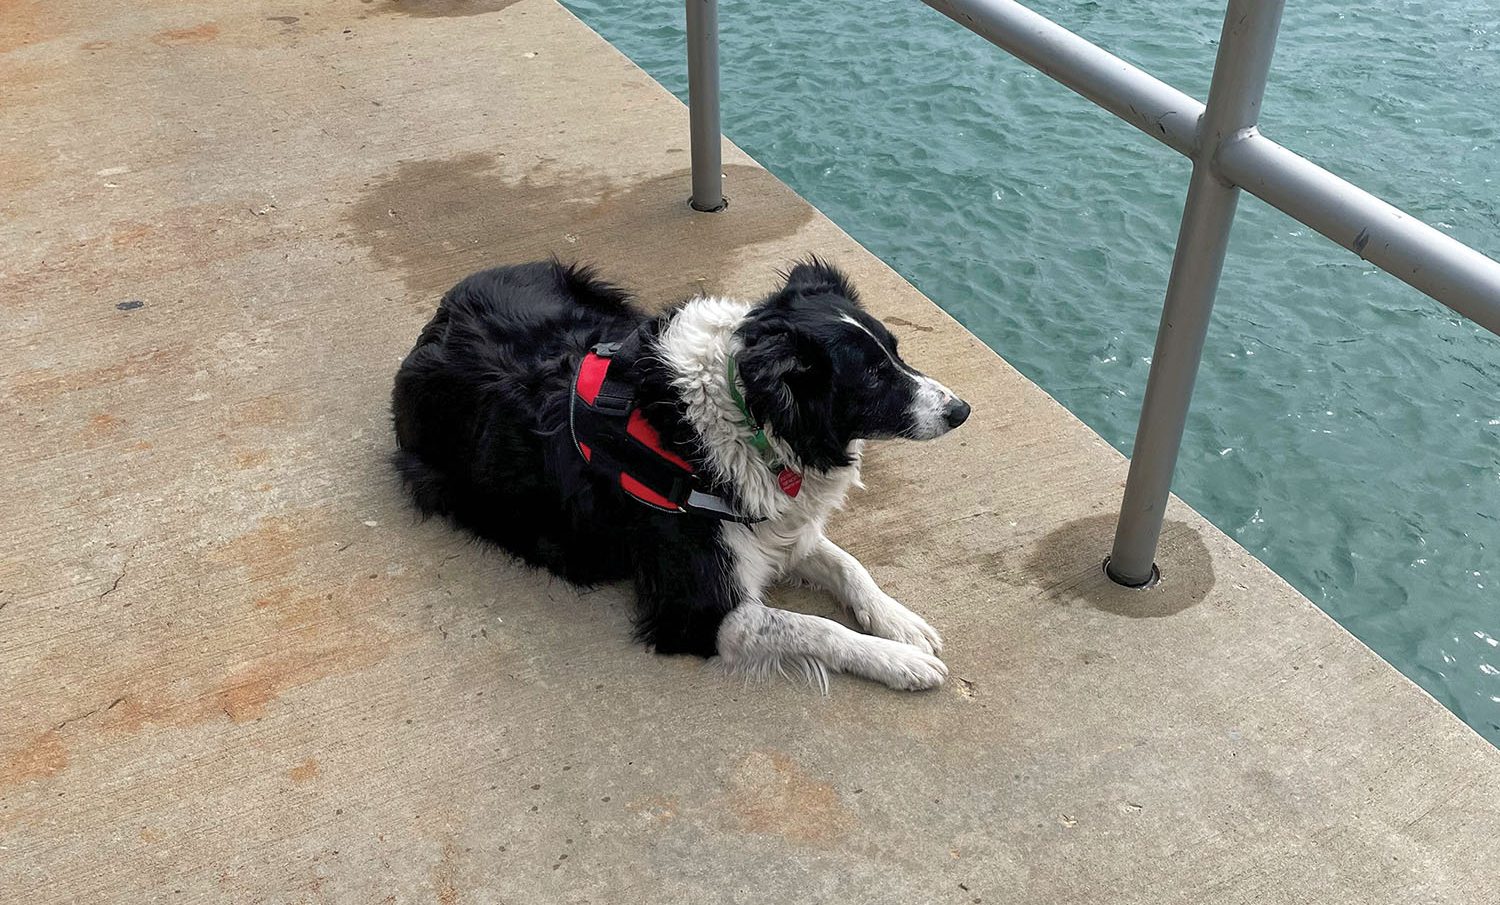 Ellie is an 8-year-old border collie who works as the “bird dispersal specialist” for both the Chicago and Tulsa engineer districts. (Photos courtesy of the Chicago Engineer District)